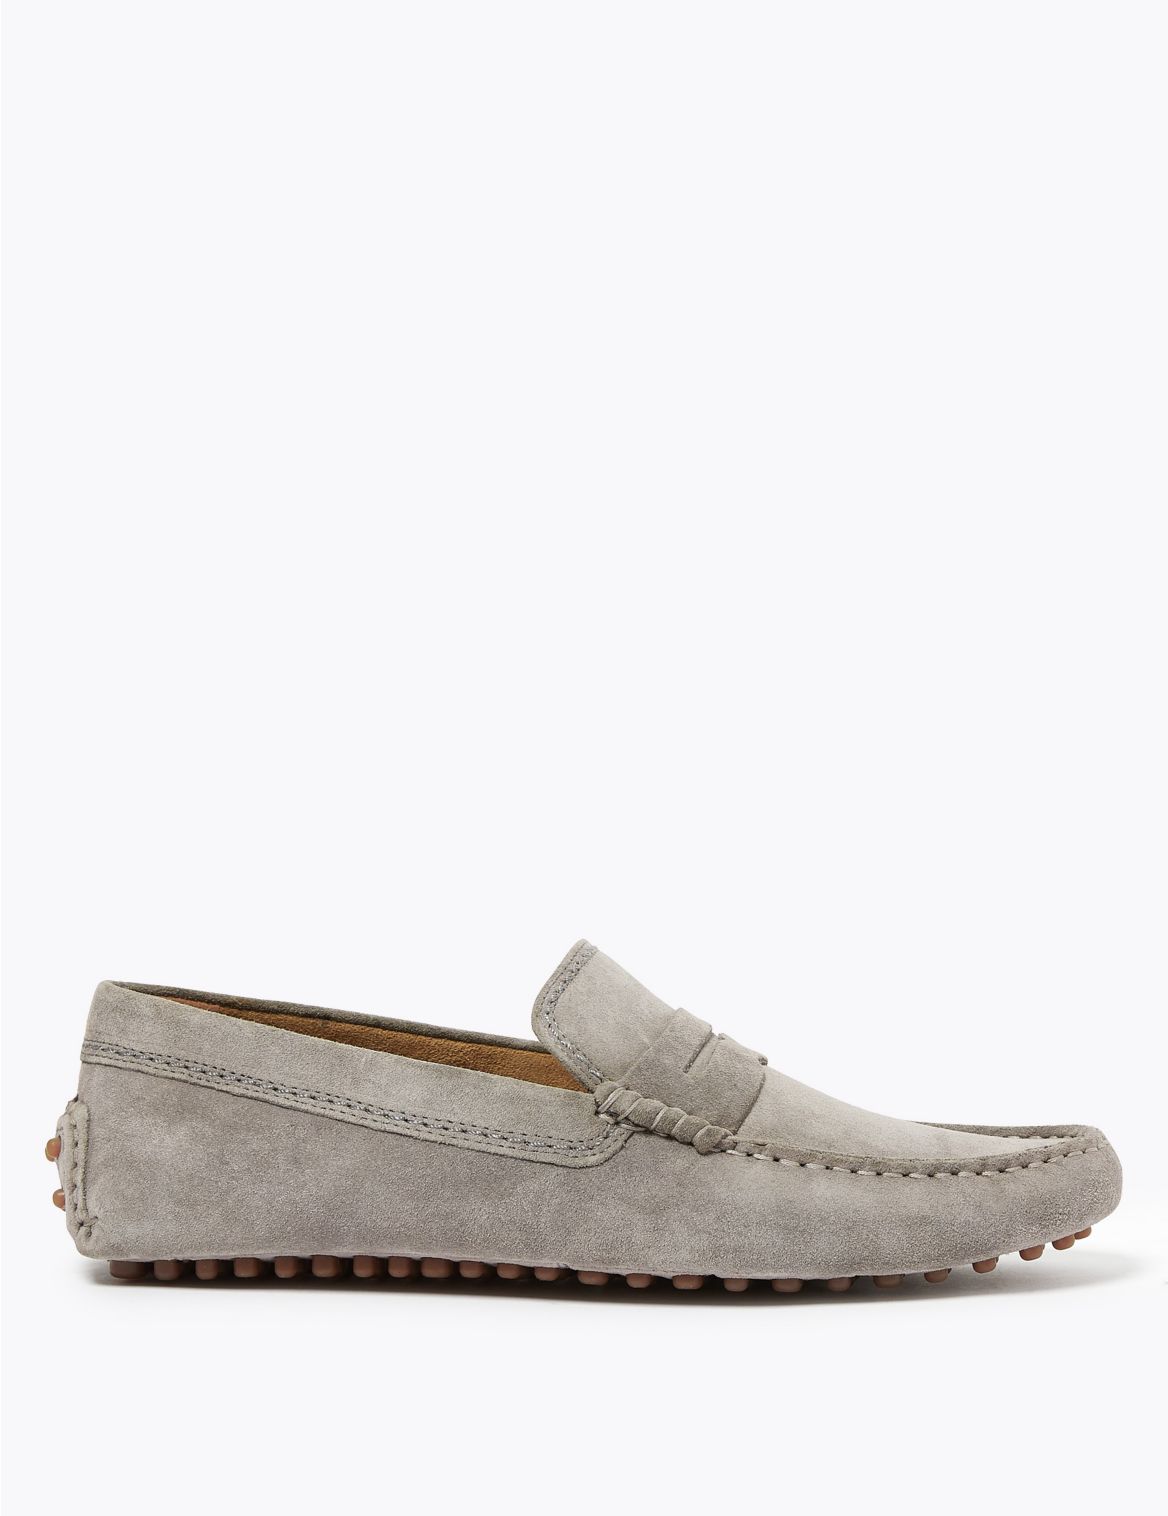 Suede Slip-On Driving Shoes grey